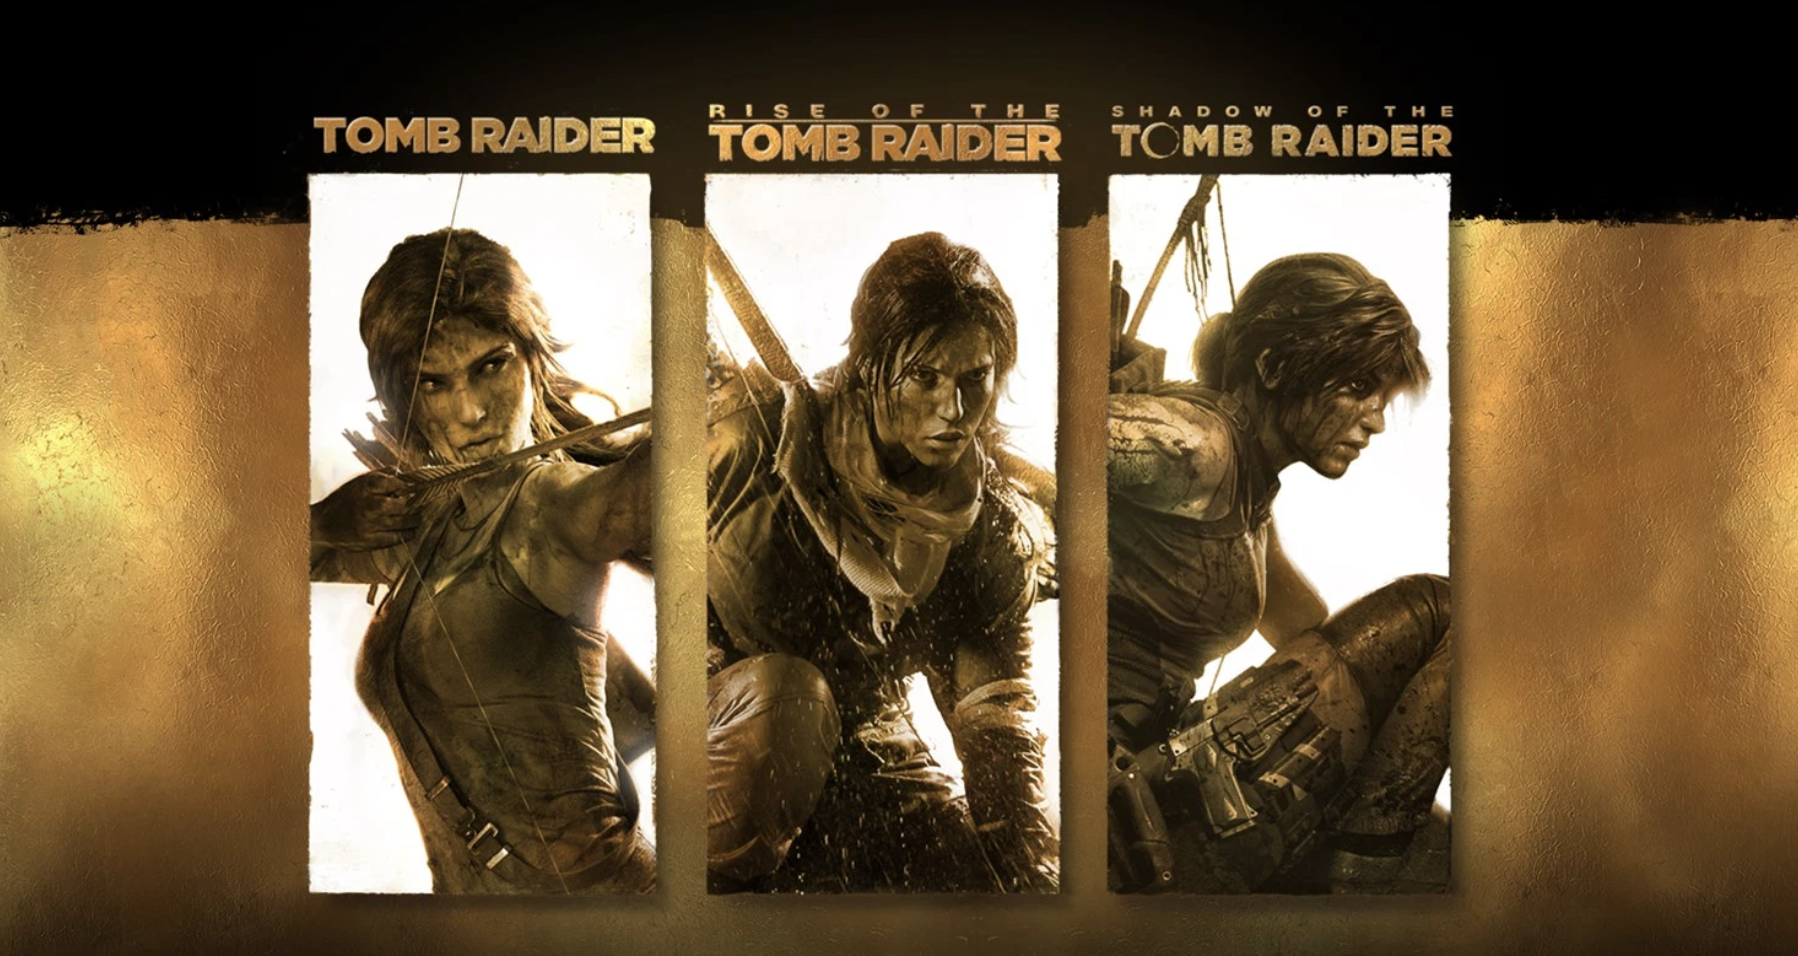 Nucleair haar Afstotend Tomb Raider Definitive Survivor Trilogy Launches On PlayStation And Xbox  For Only $20 - GameSpot